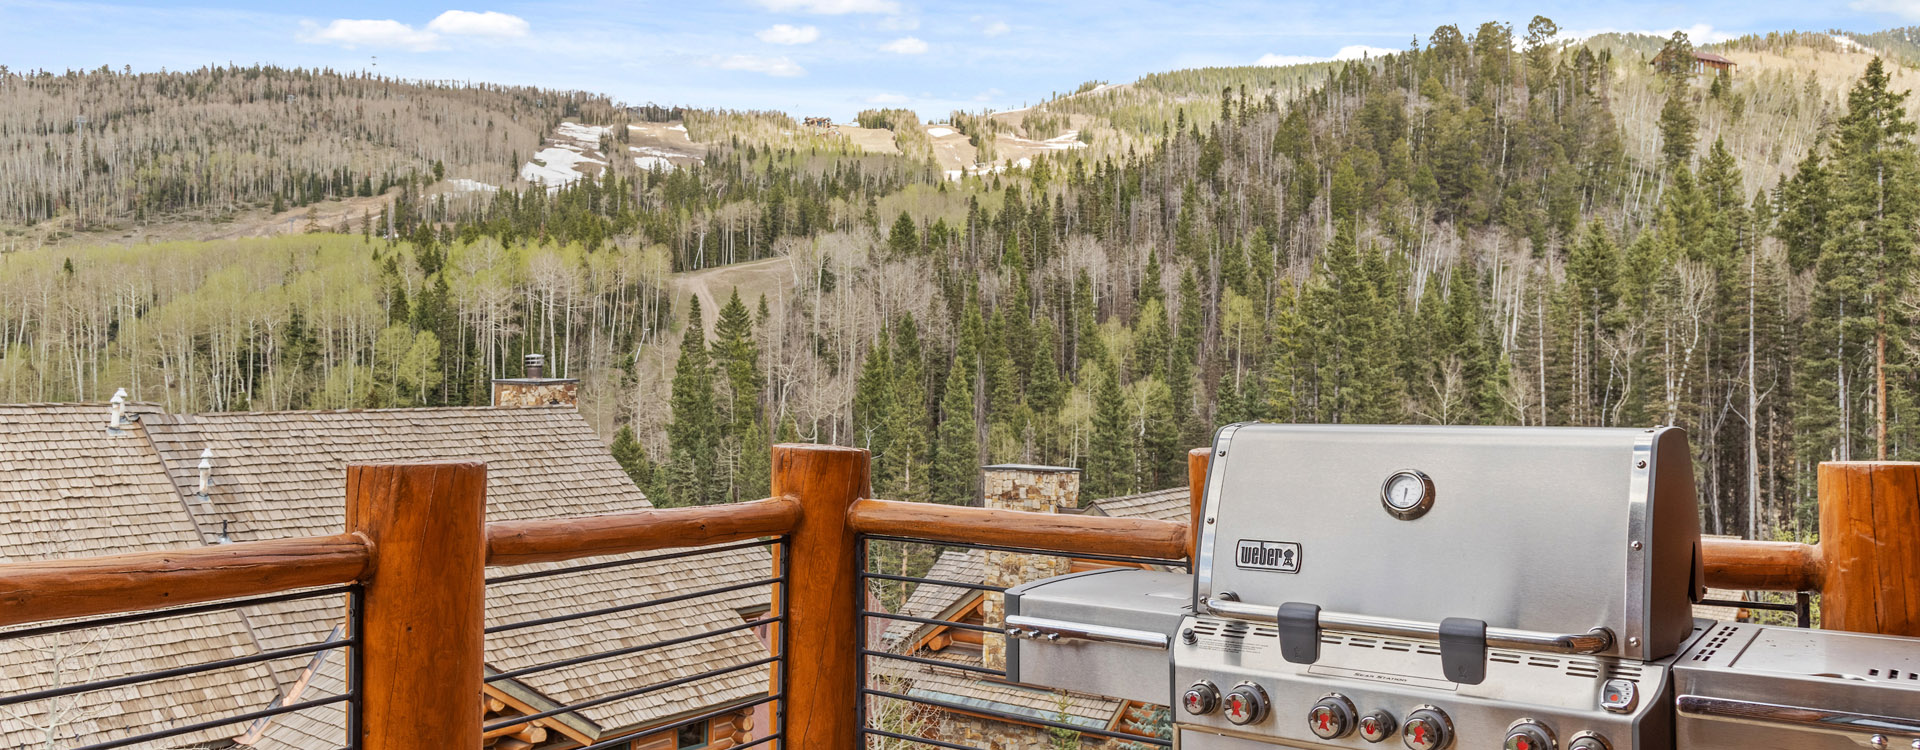 2.2-Tristant-108-Mountain-Village-Vacation-Rental-Balcony-View-2